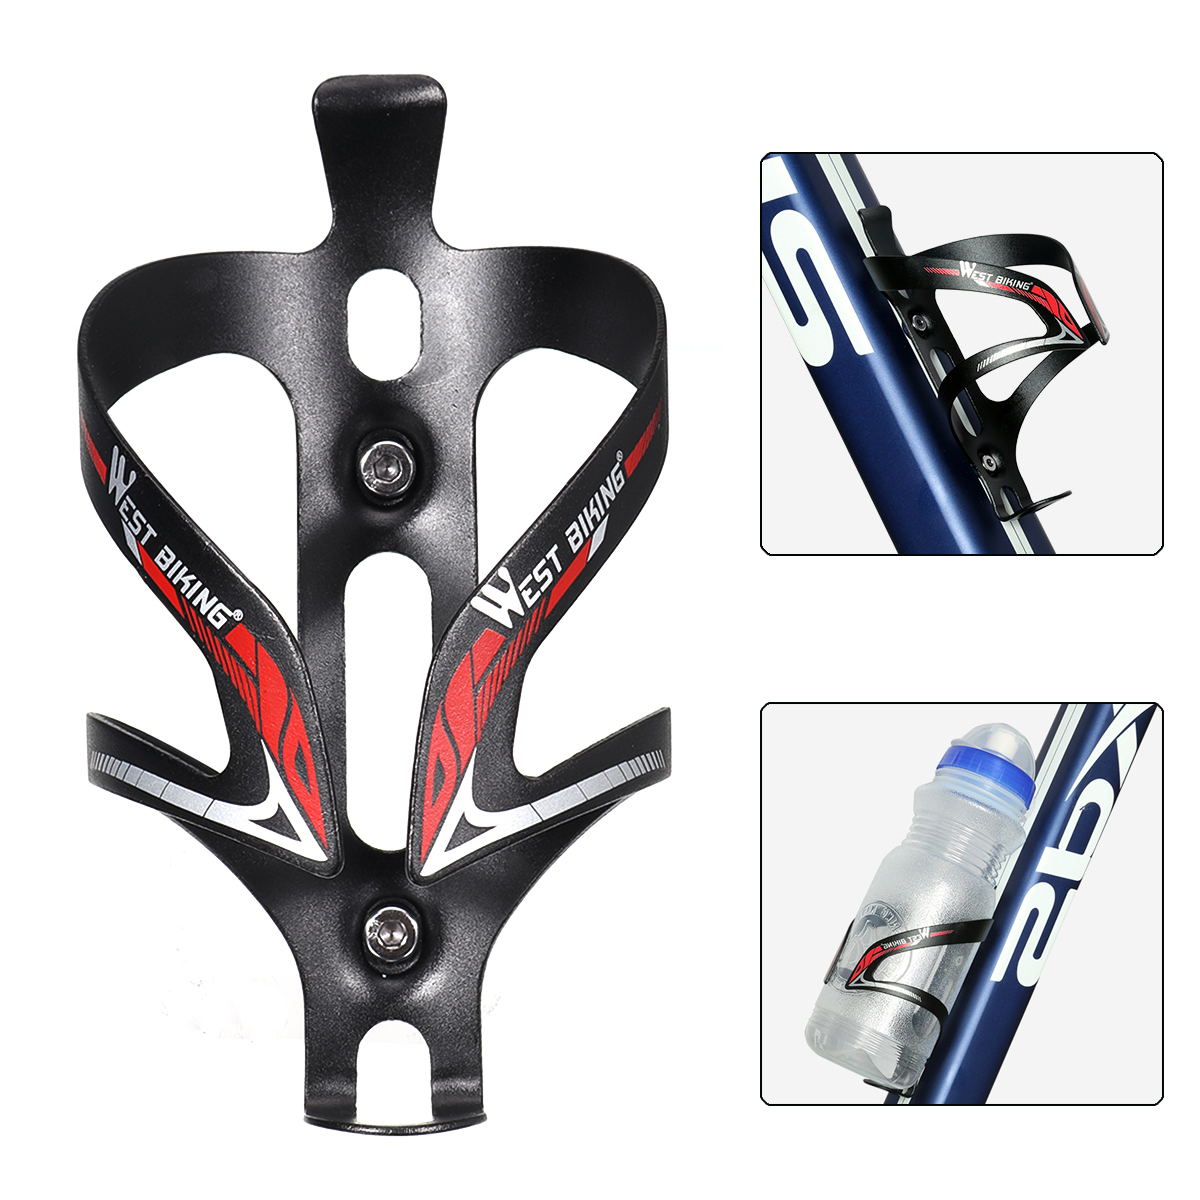 Bicycle-Drink-Water-Bottle-Holder-Cycling-Sports-Bike-Aluminum-Alloy-Rack-Cages-1790721-6